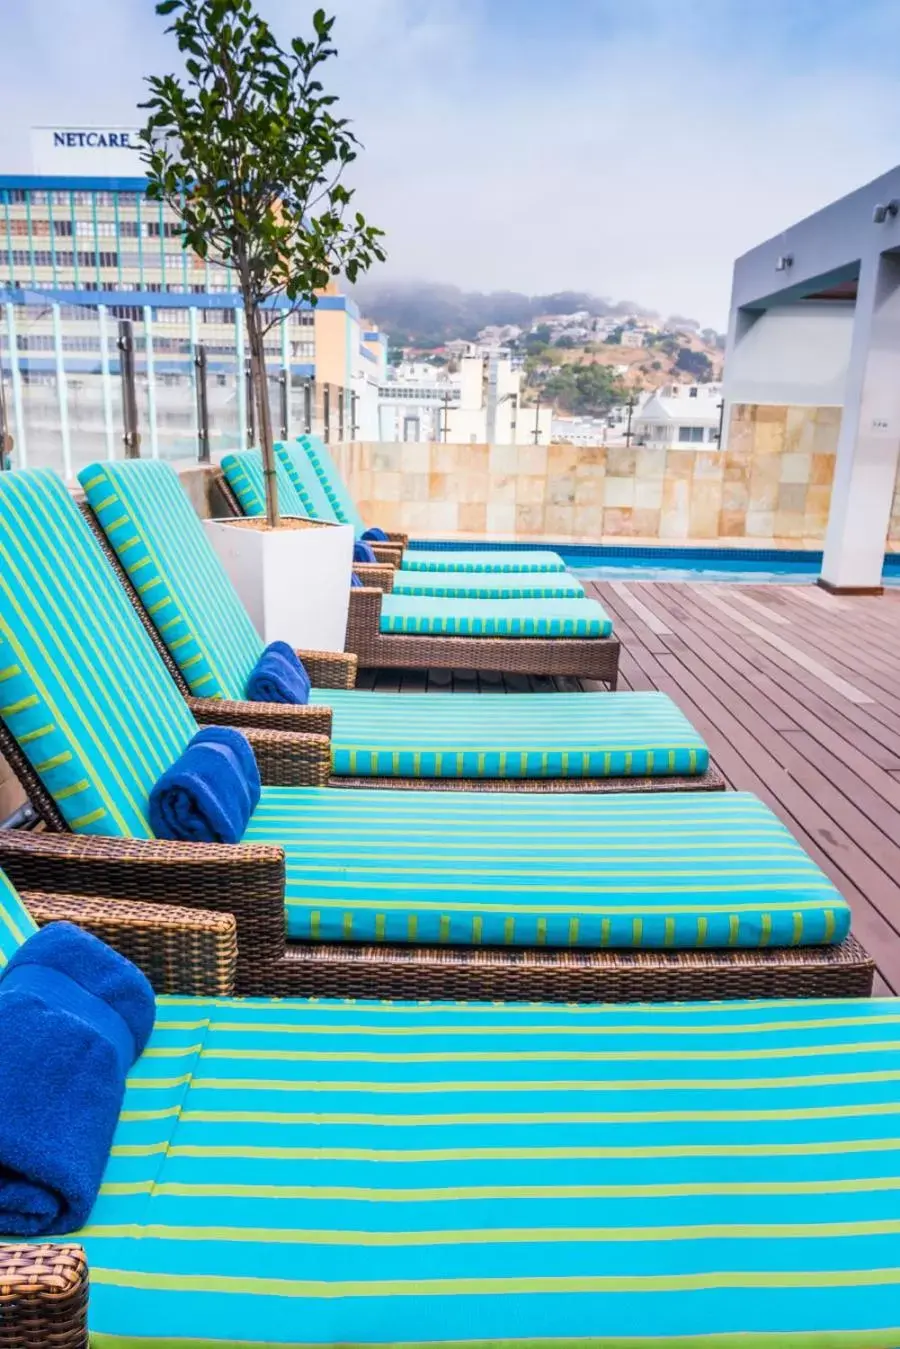 Swimming pool in ONOMO Hotel Cape Town – Inn On The Square